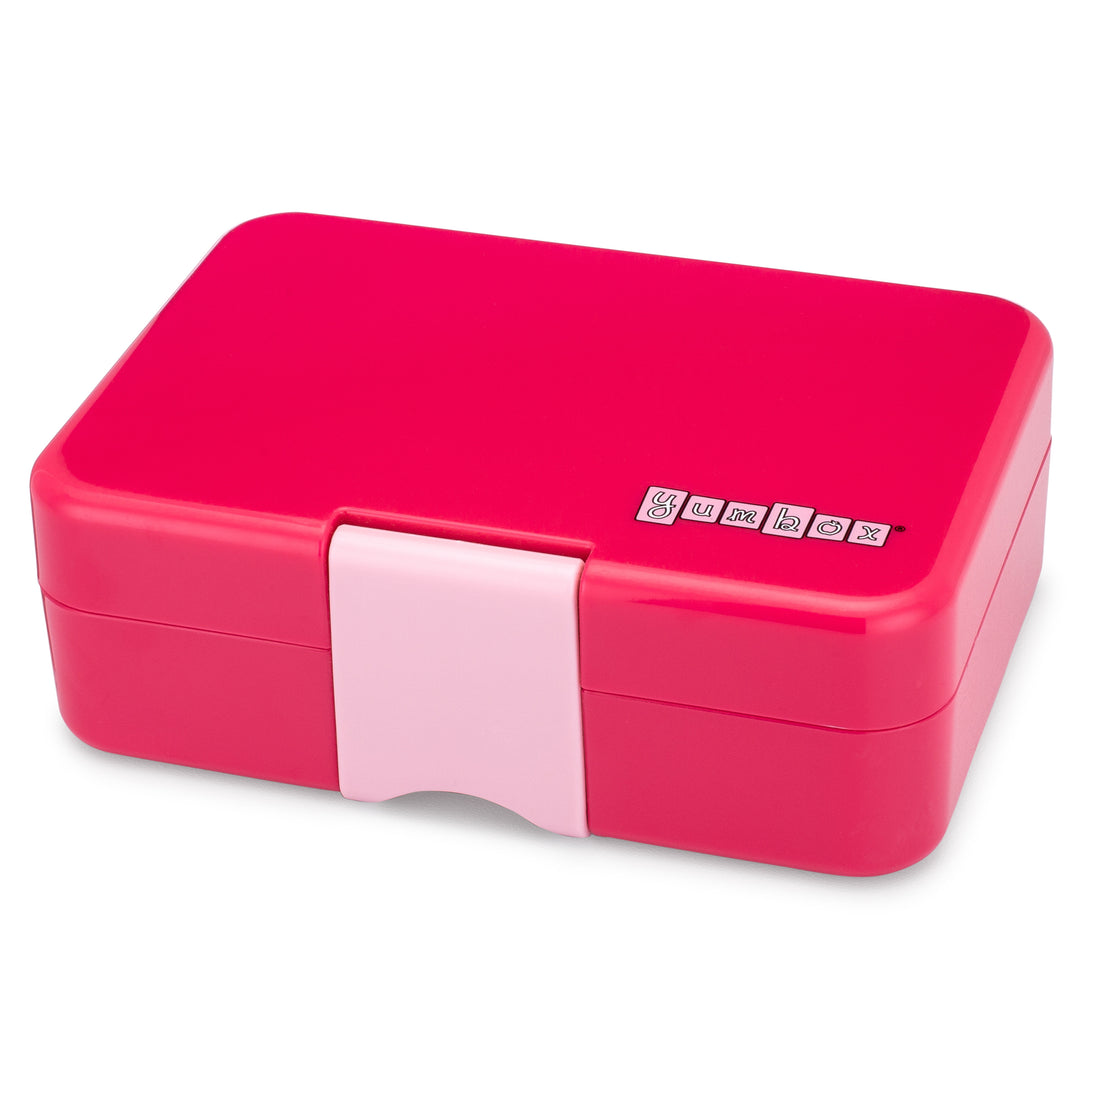 yumbox-mini-snack-lotus-pink-3-compartment-lunch-box- (1)